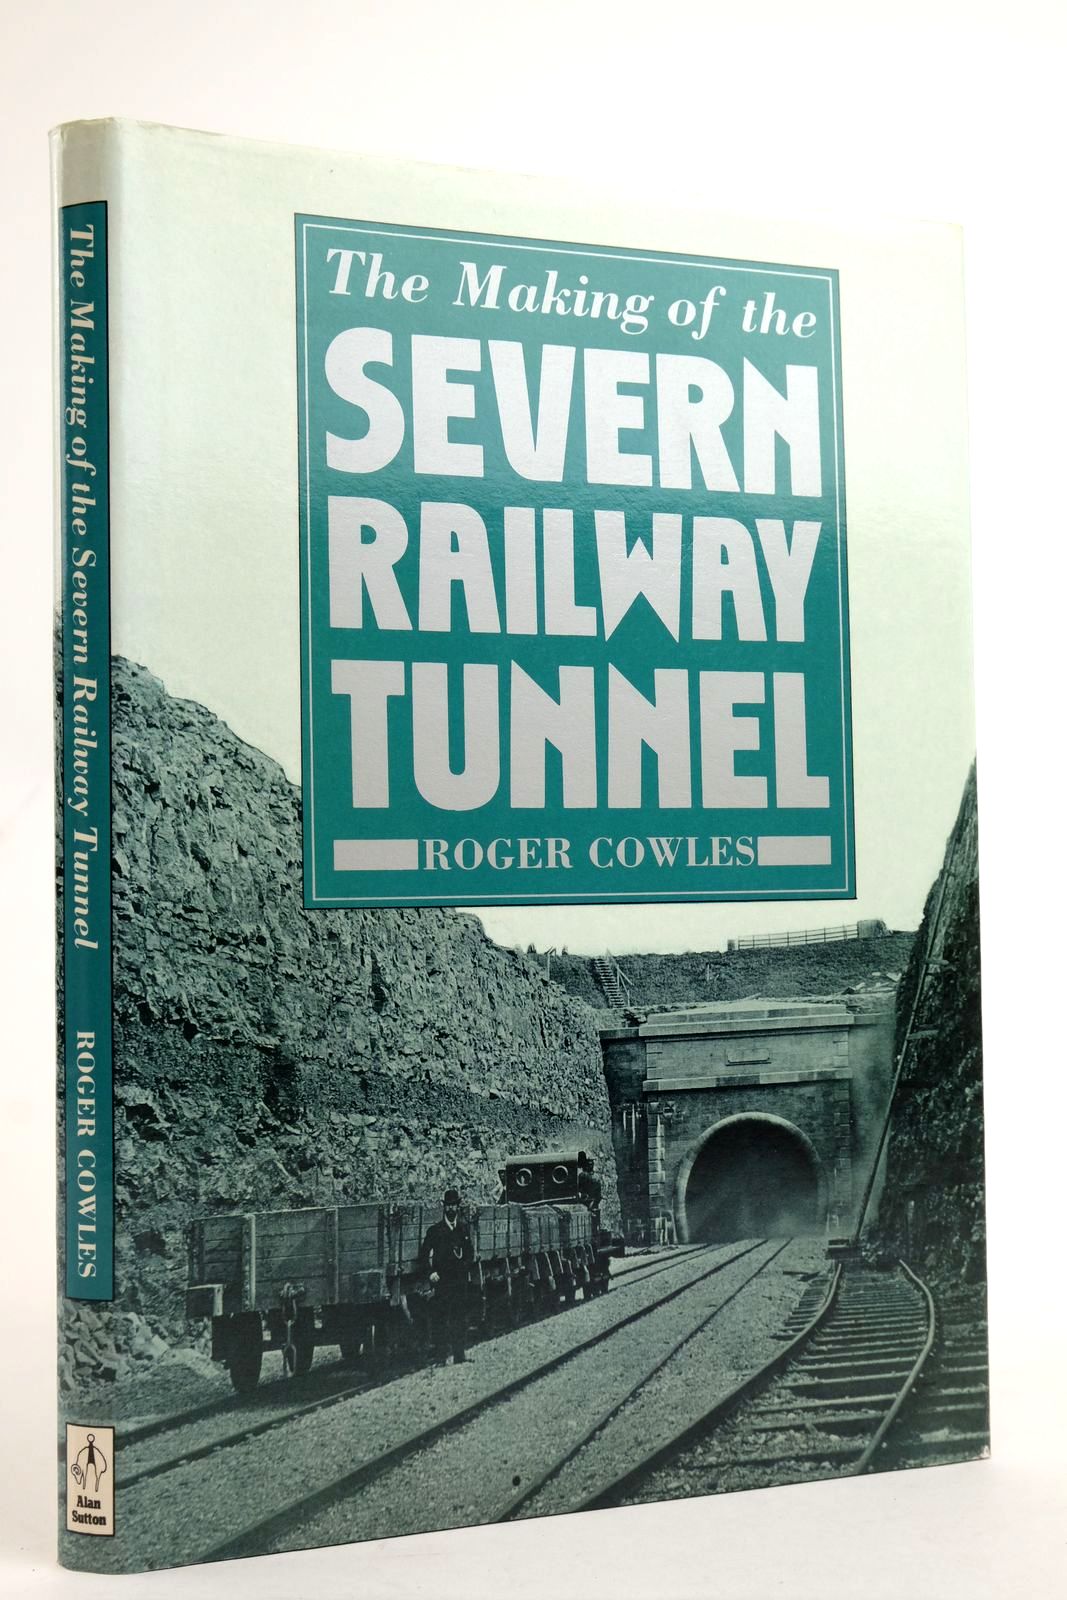 Photo of THE MAKING OF THE SEVERN RAILWAY TUNNEL written by Cowles, Roger published by Alan Sutton (STOCK CODE: 2135865)  for sale by Stella & Rose's Books